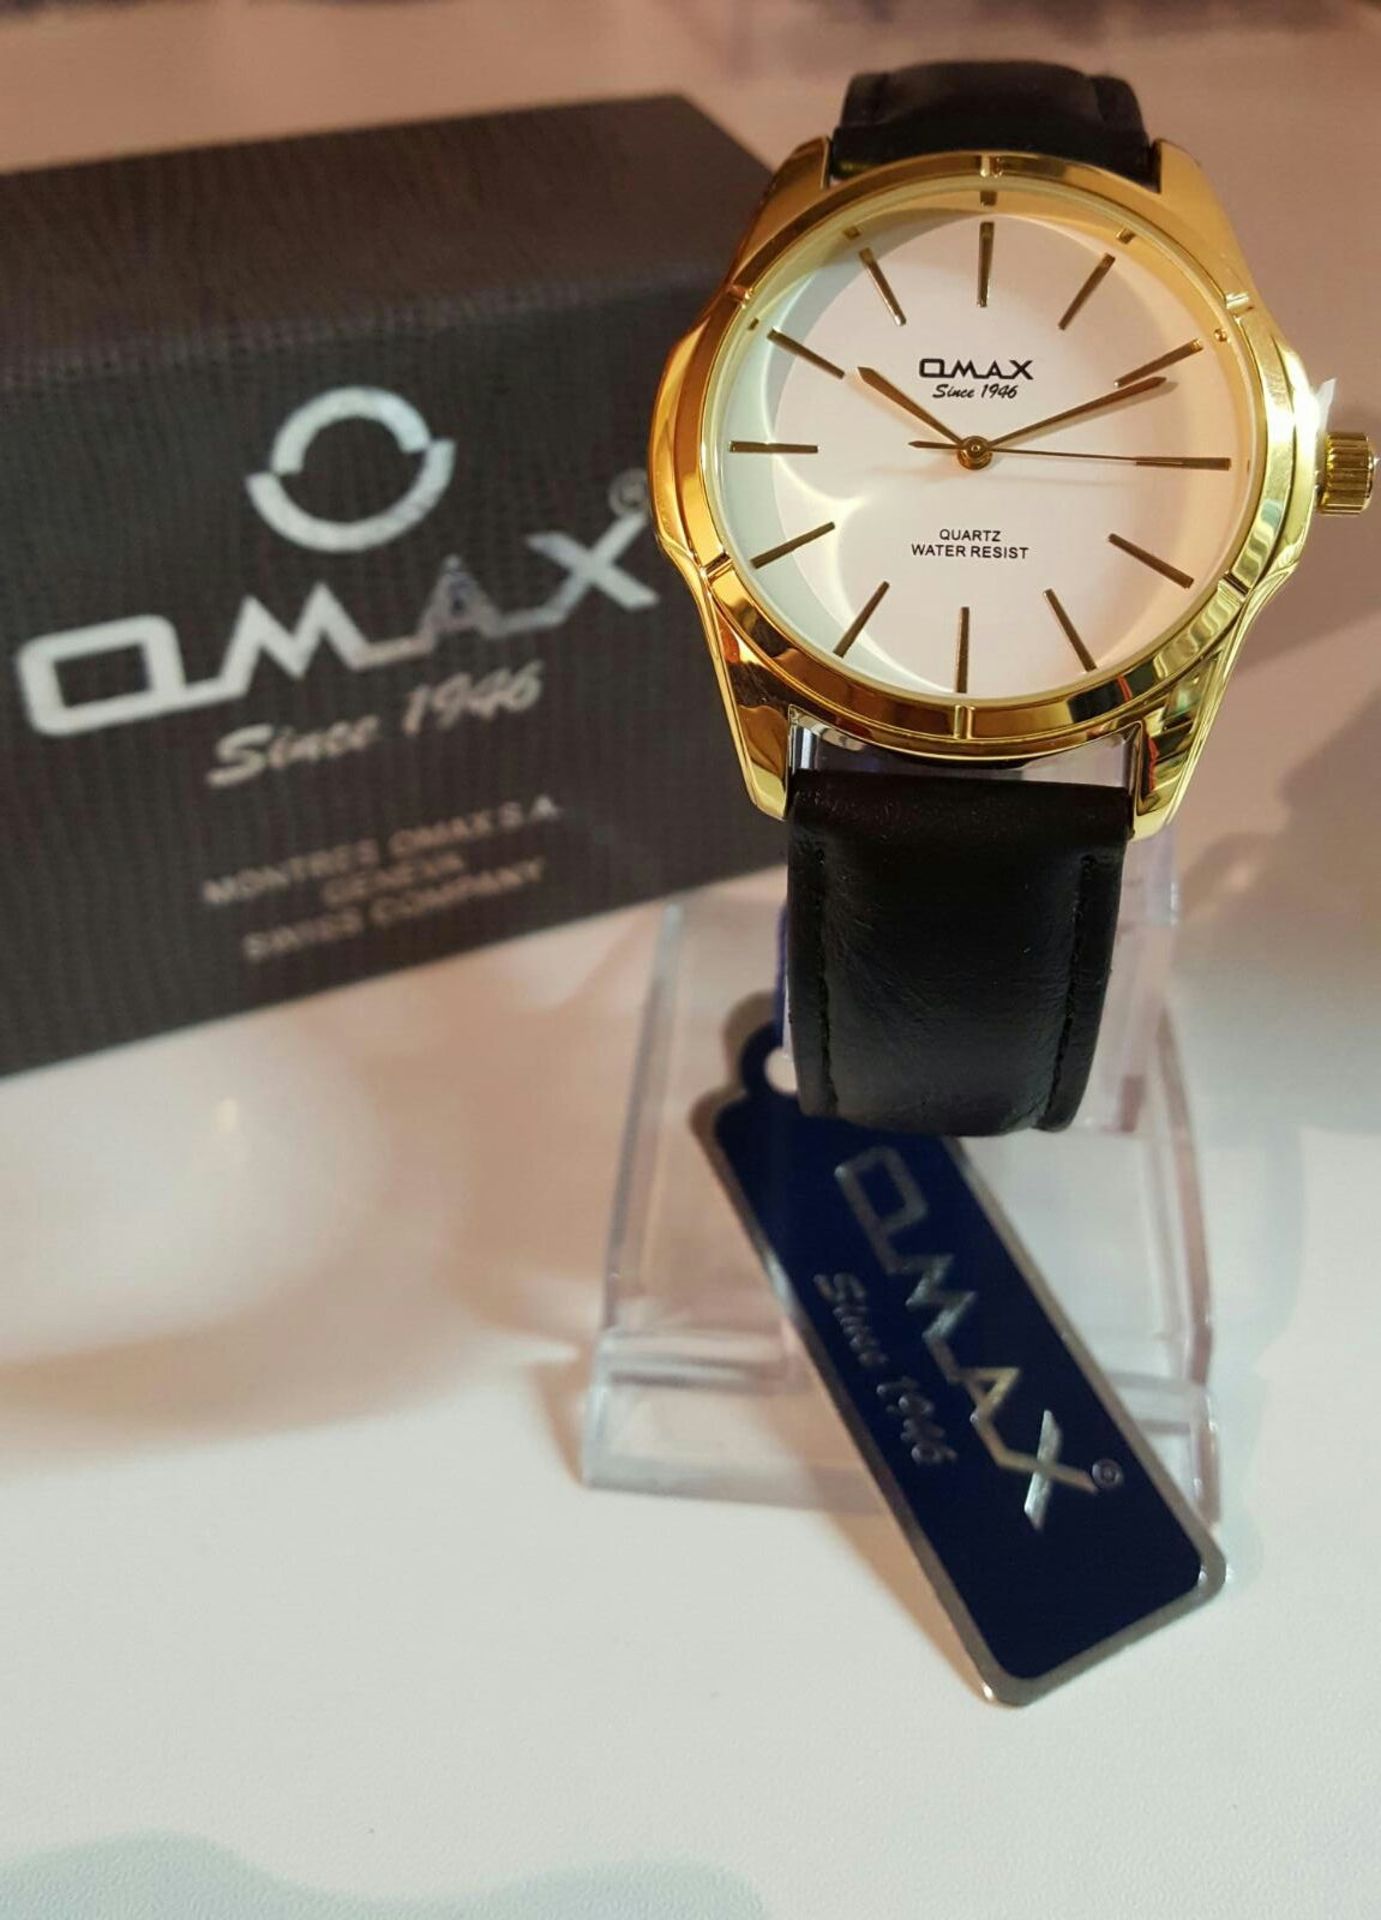 10 X LADIES & GENTS FASHION WATCHES BY MABZ LONDON, AN LONDON, OMAX, VARIOUS DESIGNS AND MODELS - Image 15 of 20